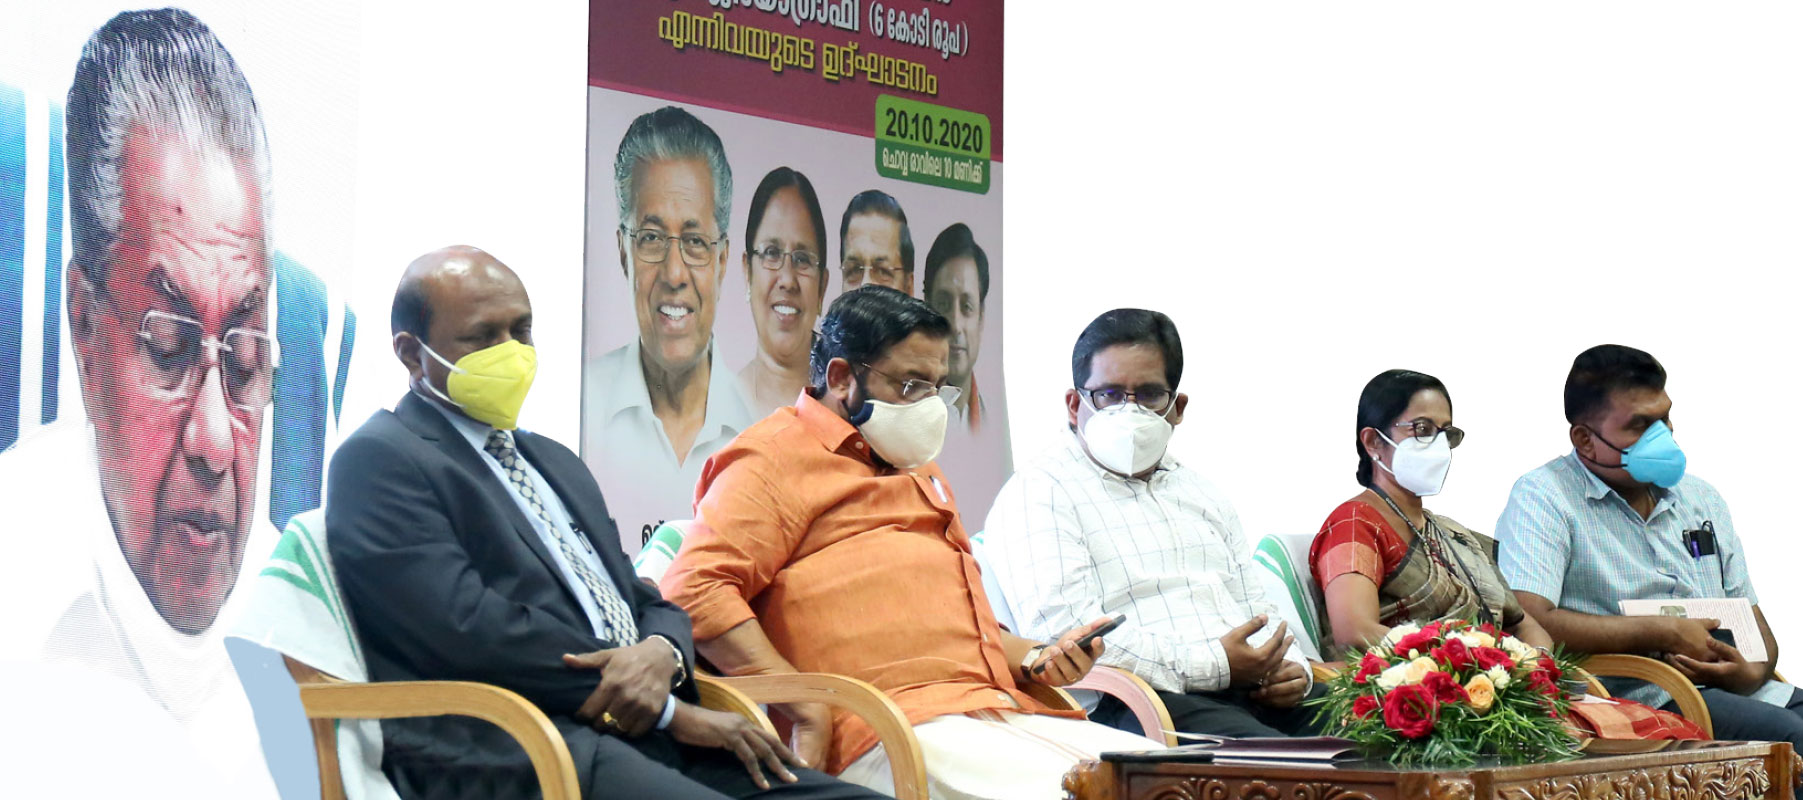 Kerala chief minister Pinarayi Vijayan (left) addressed the inaugural session online. Seated on the dais are DG Thomas Vavanikunnel; Kadakampalli Surendran, minister for Tourism; PDG Suresh Mathew, Dr Sara Varghese, principal, Trivandrum Medical College and Dr Sharmad, the college superintendent. 